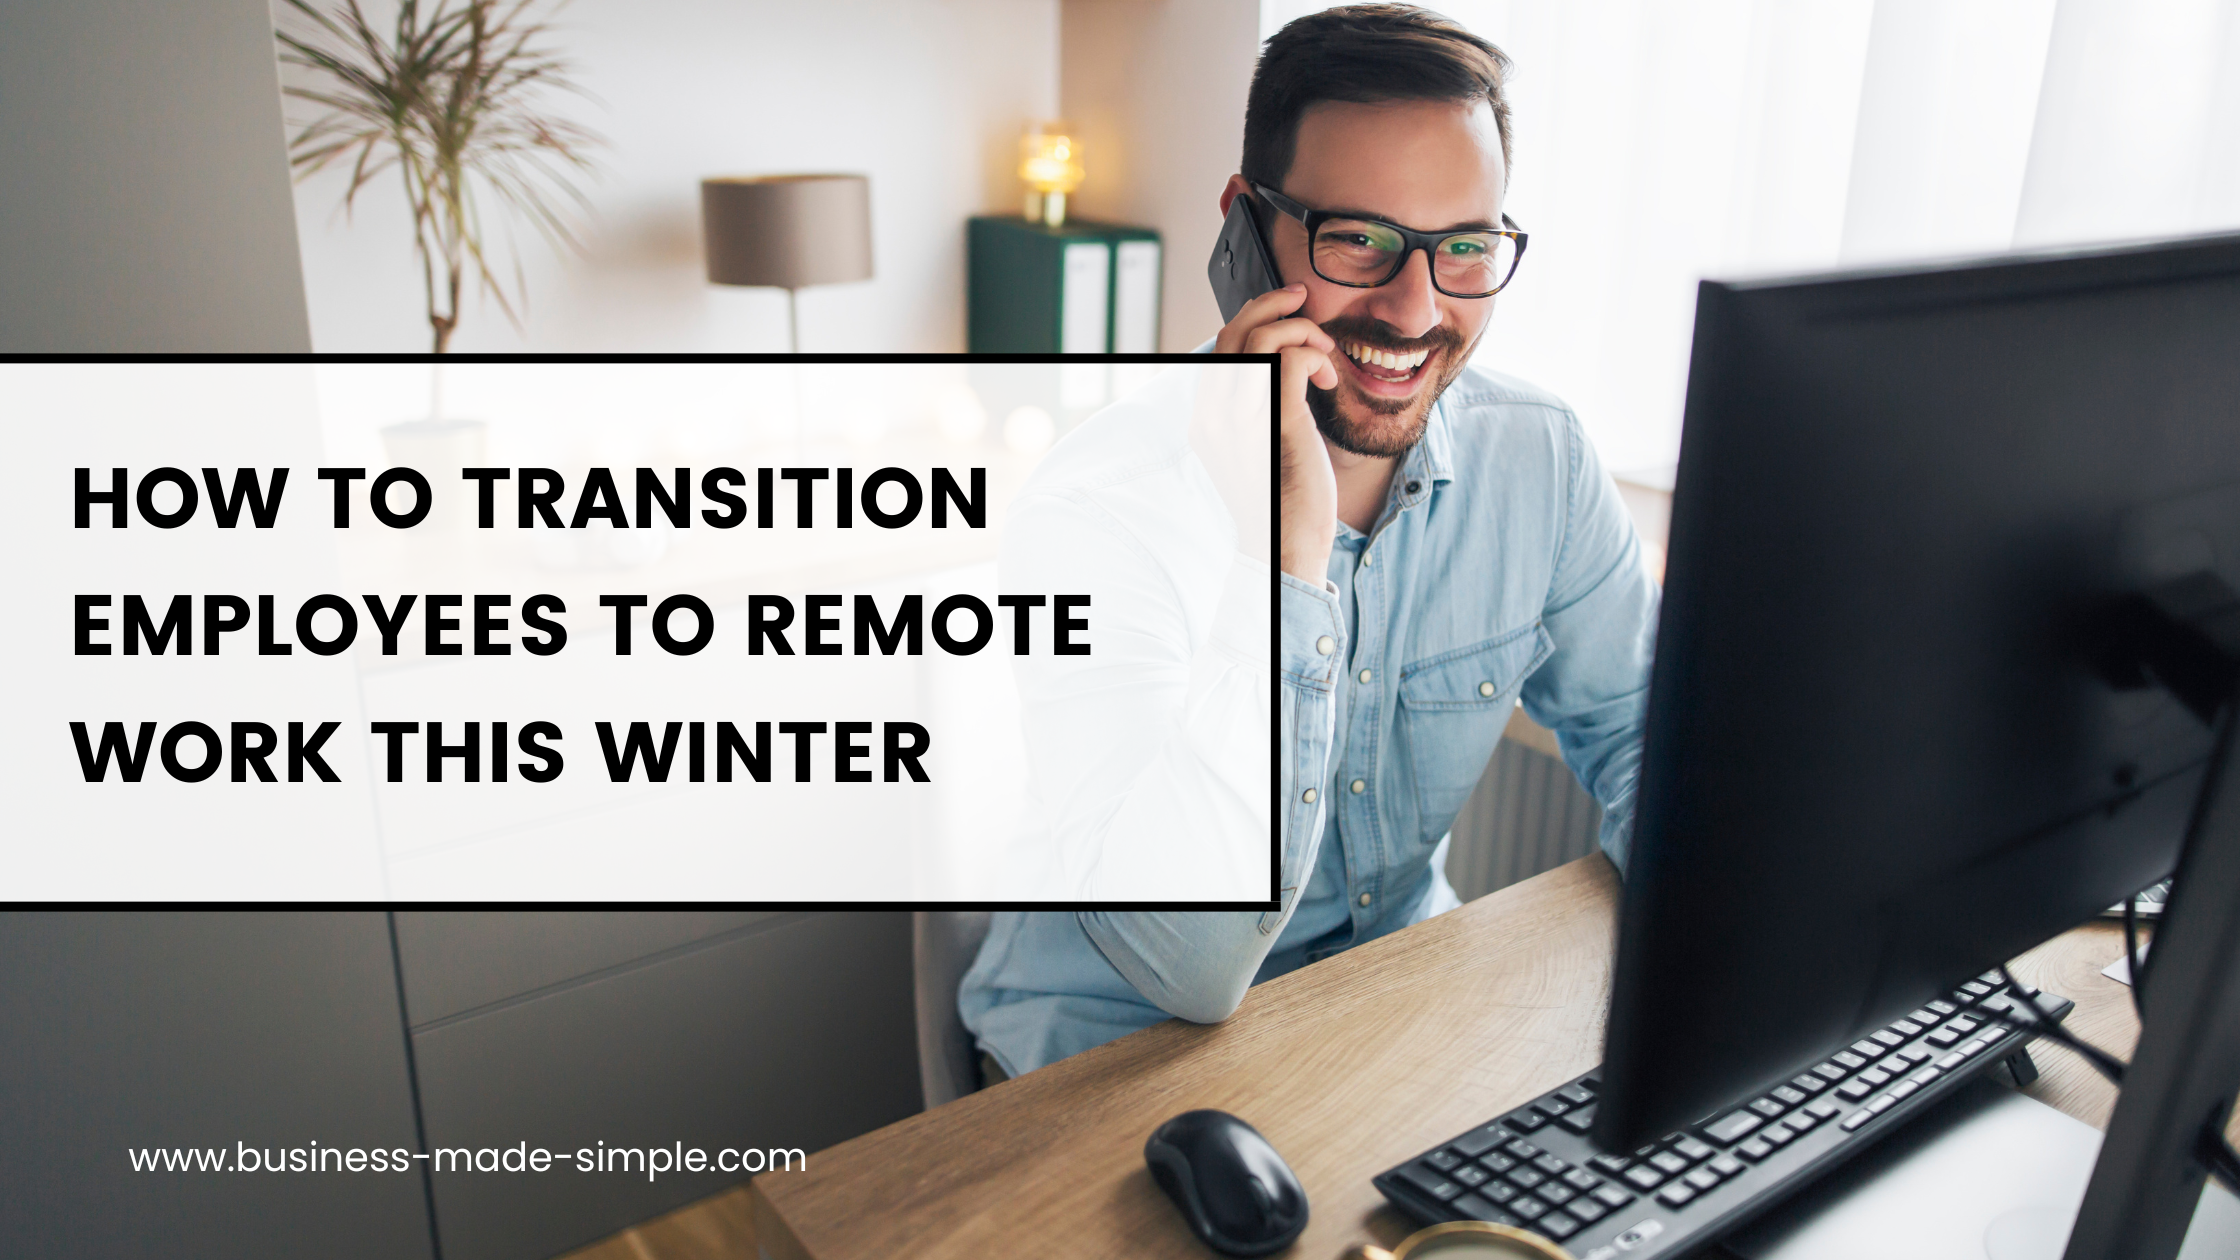 Remote work strategy Winter adaptation plan Seasonal telecommuting Cold season work Remote work preparation Employee well-being Strategic remote shift Cold weather arrangements Effective telecommuting Communication in remote work Employee health Winter telework implementation Remote work wellness commitment Transitioning to winter remote work Winter remote operation planning